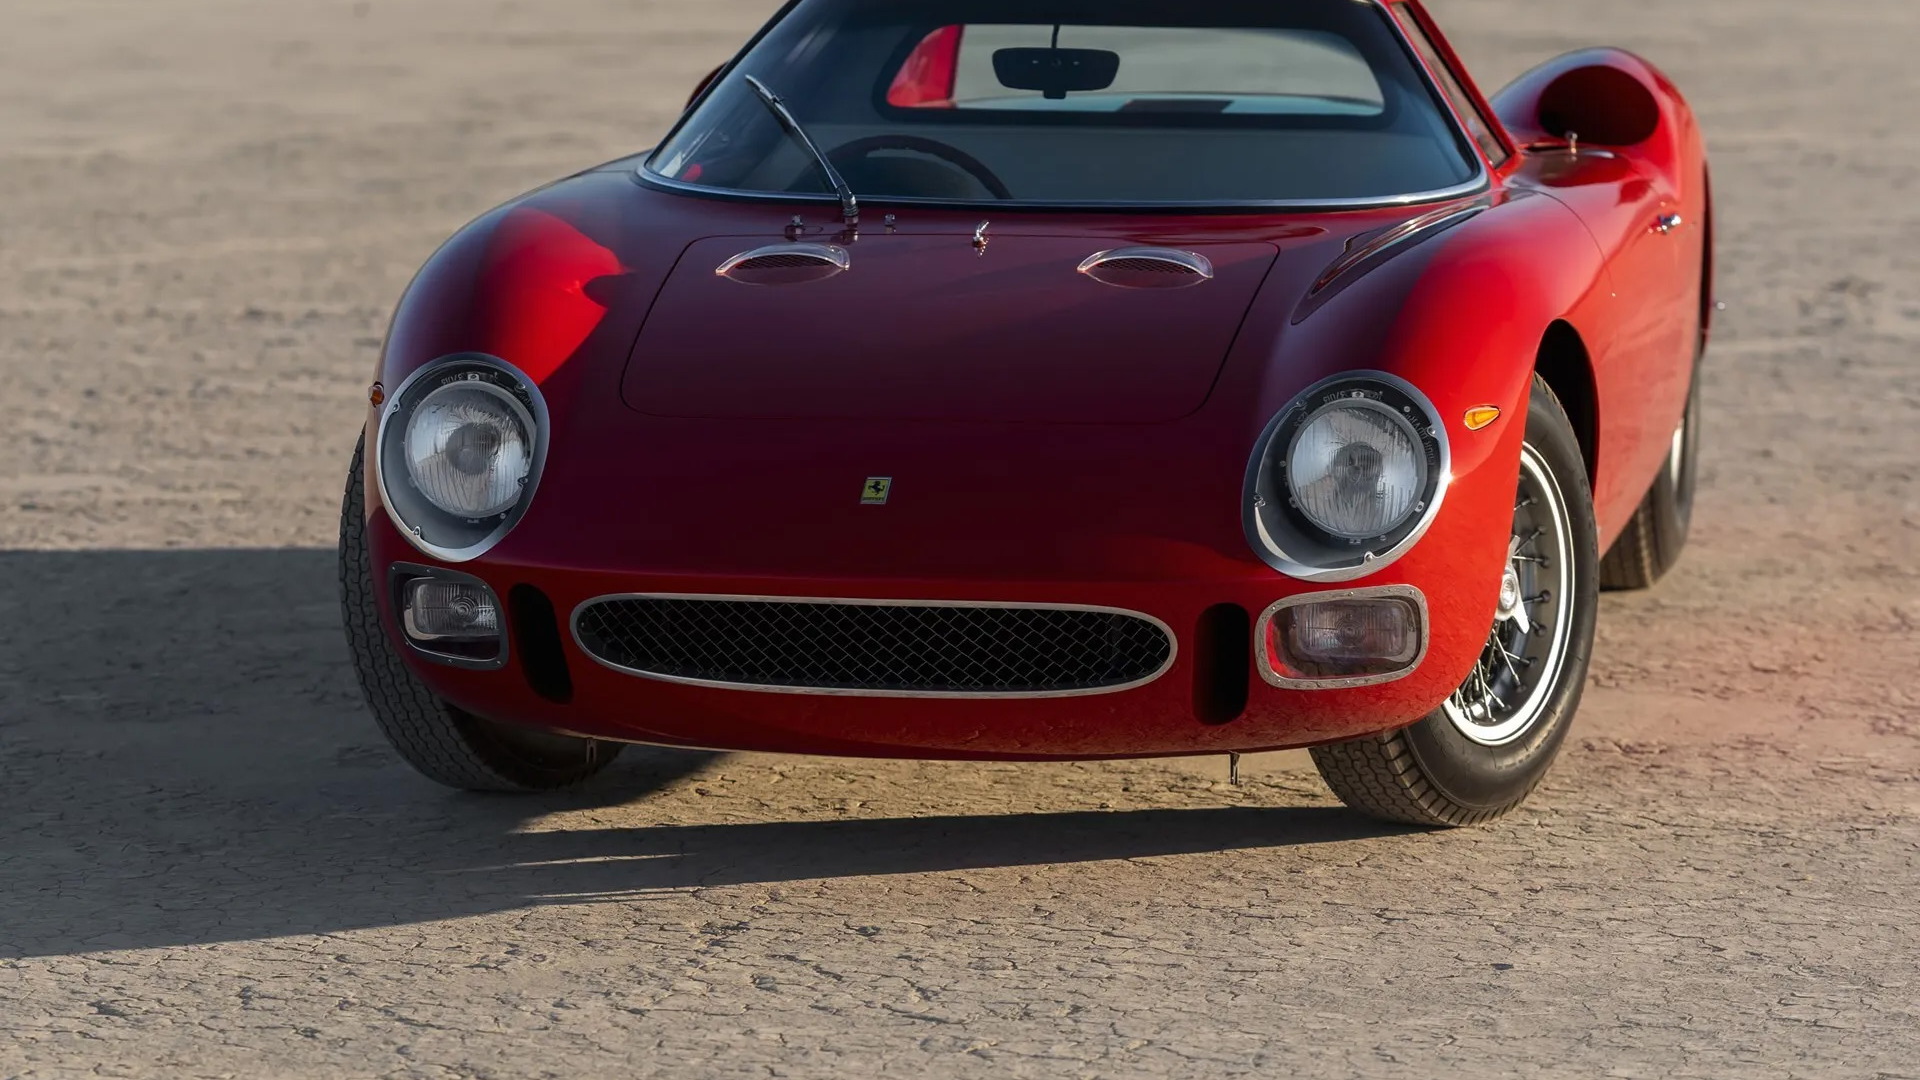 1964 Ferrari 250 LM bearing chassis No. 6053 - Photo credit: RM Sotheby's